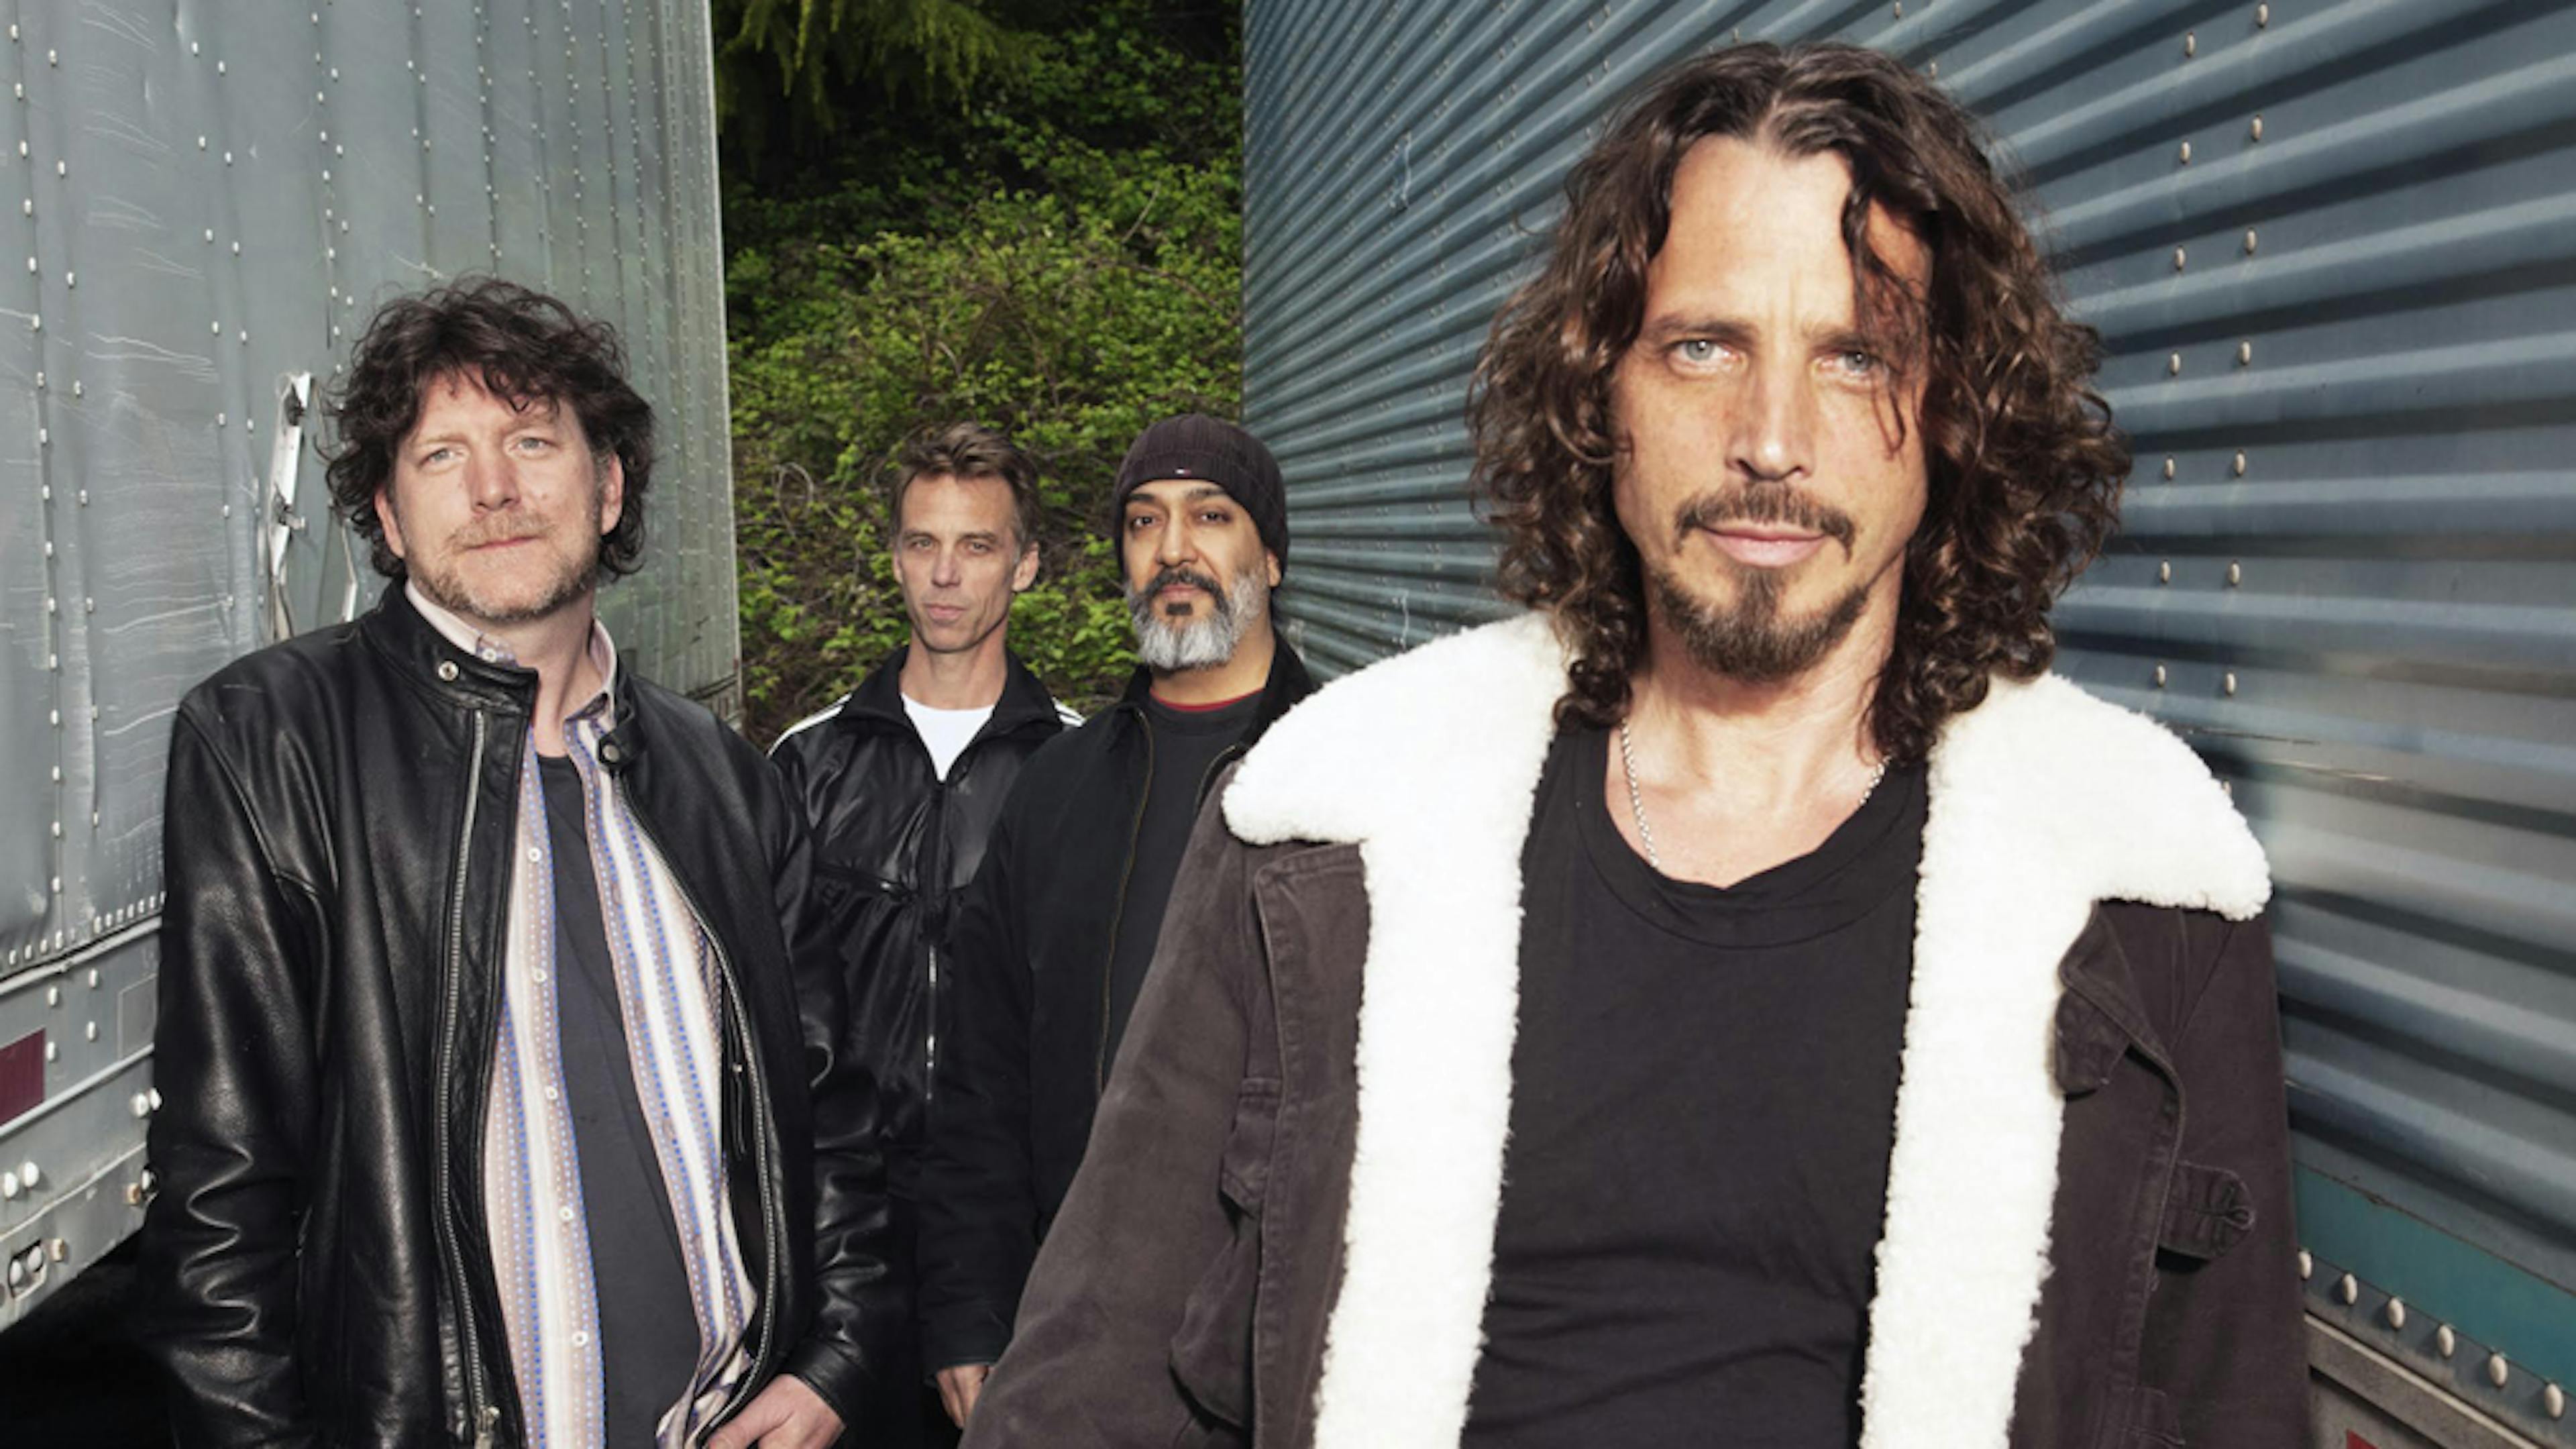 Soundgarden Members To Reunite For The First Time Since Chris Cornell's Death